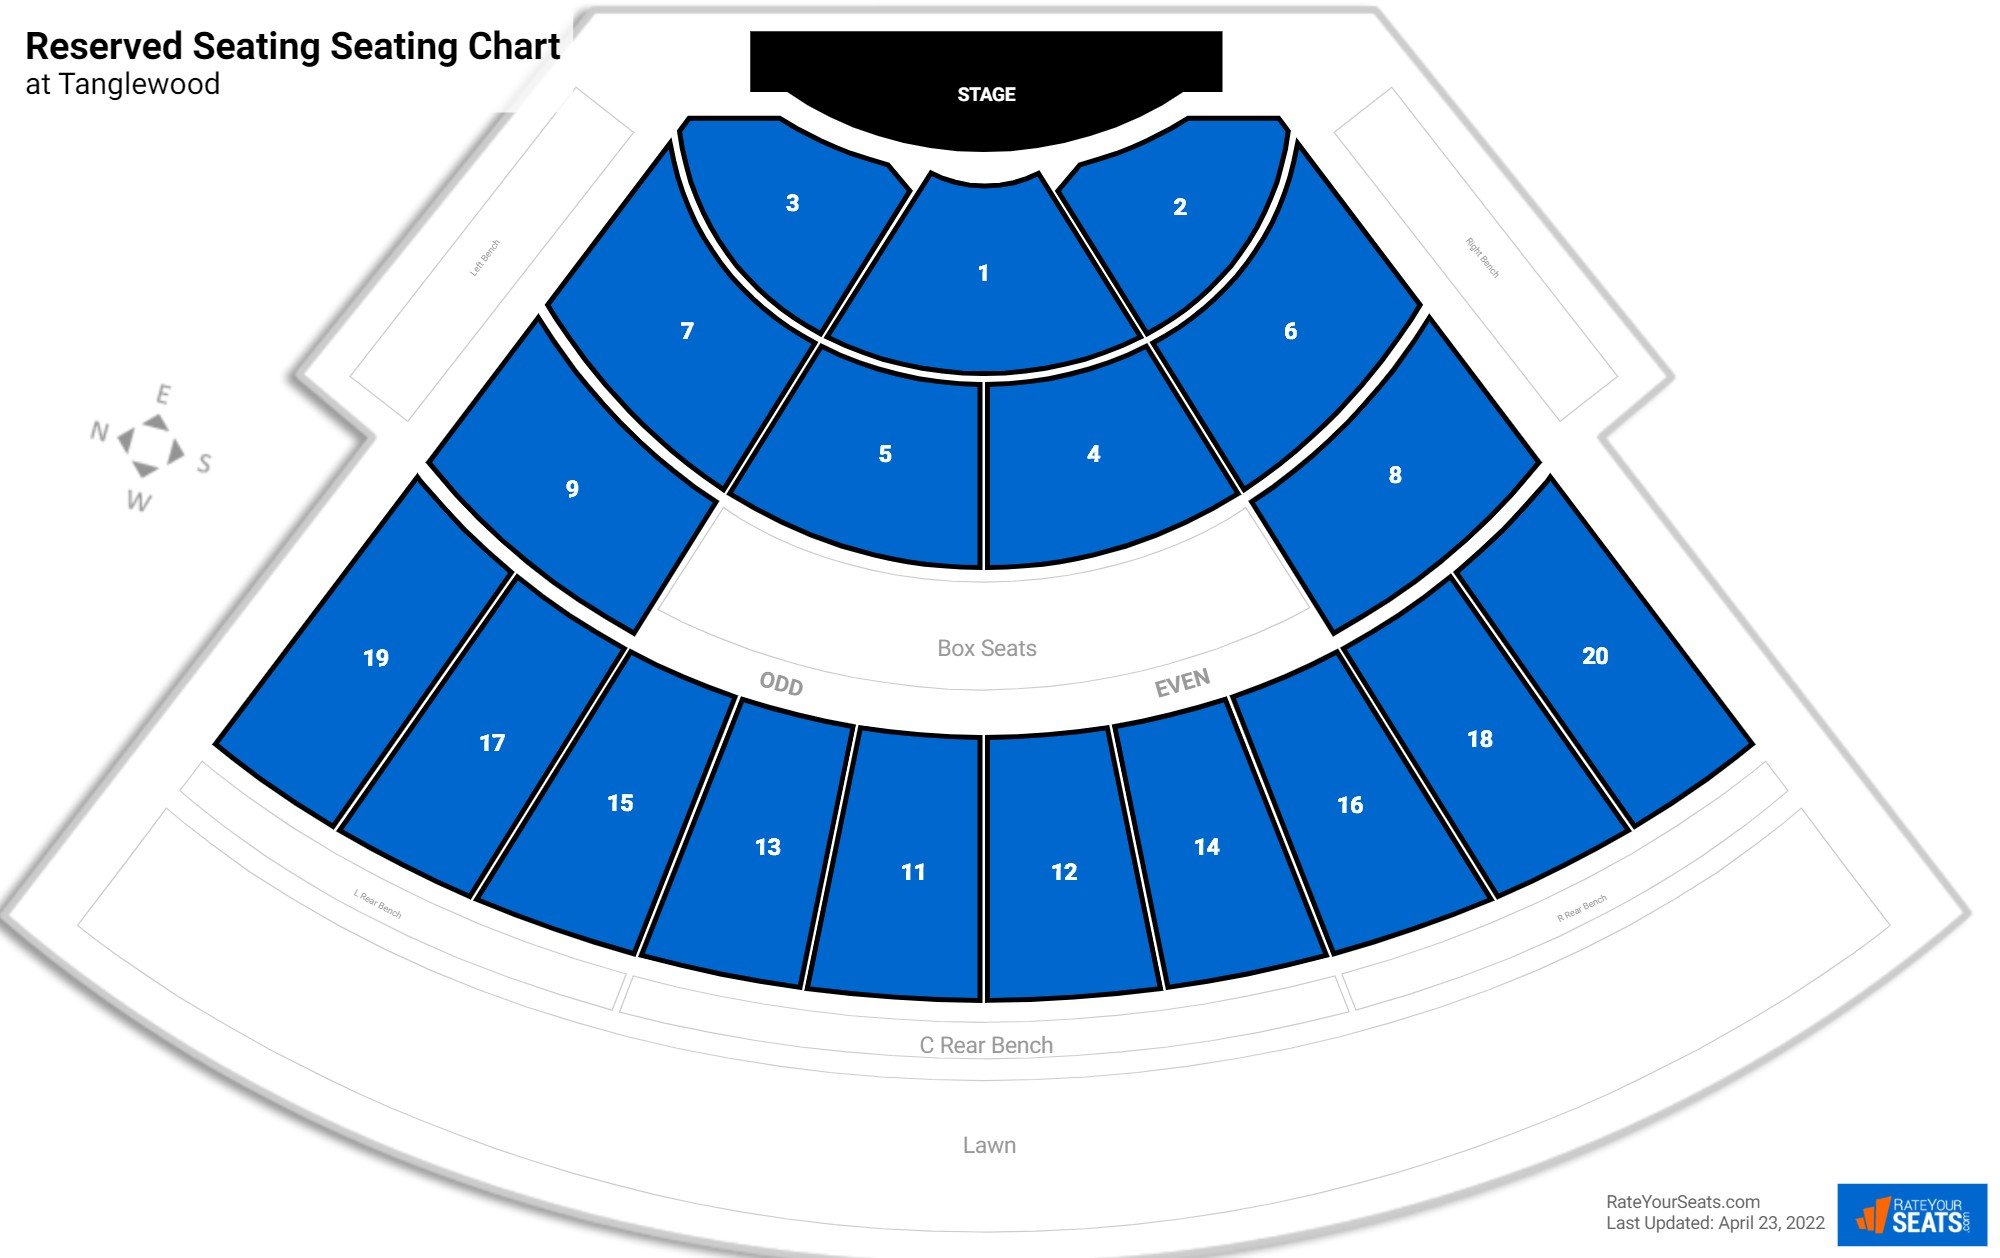 Tanglewood Shed Seating Chart